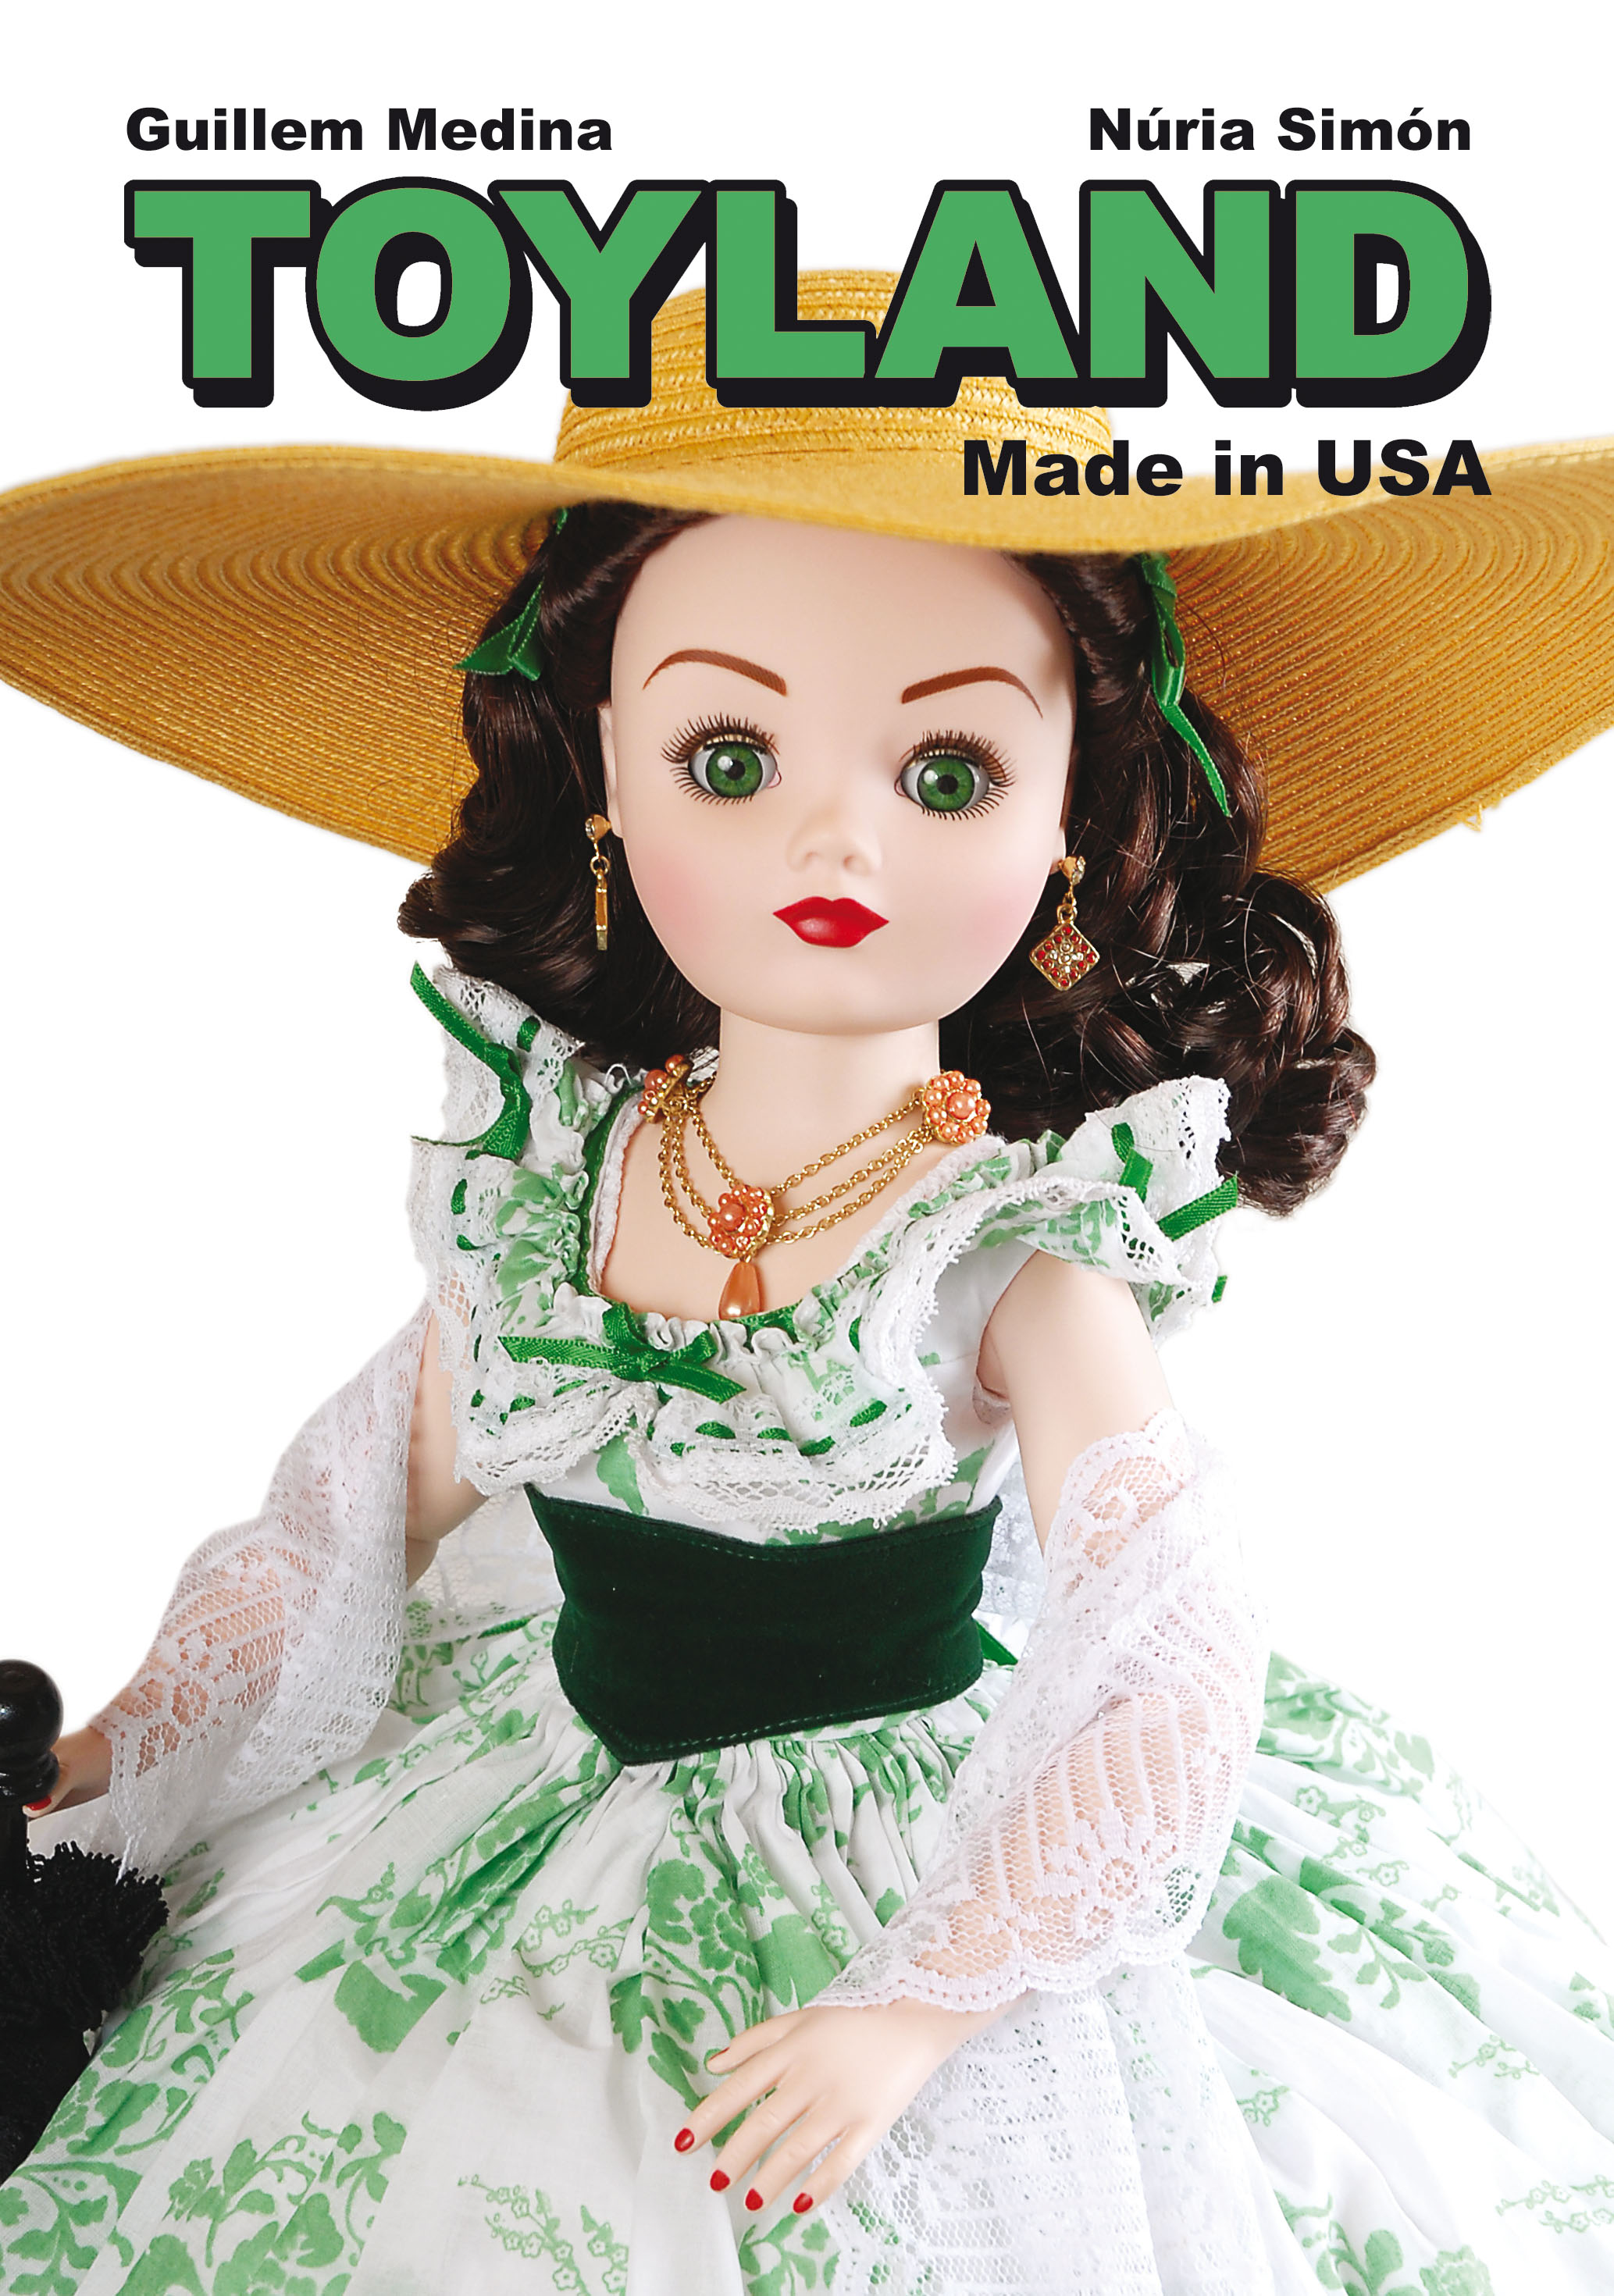 Toyland Made in USA (9788415163626)